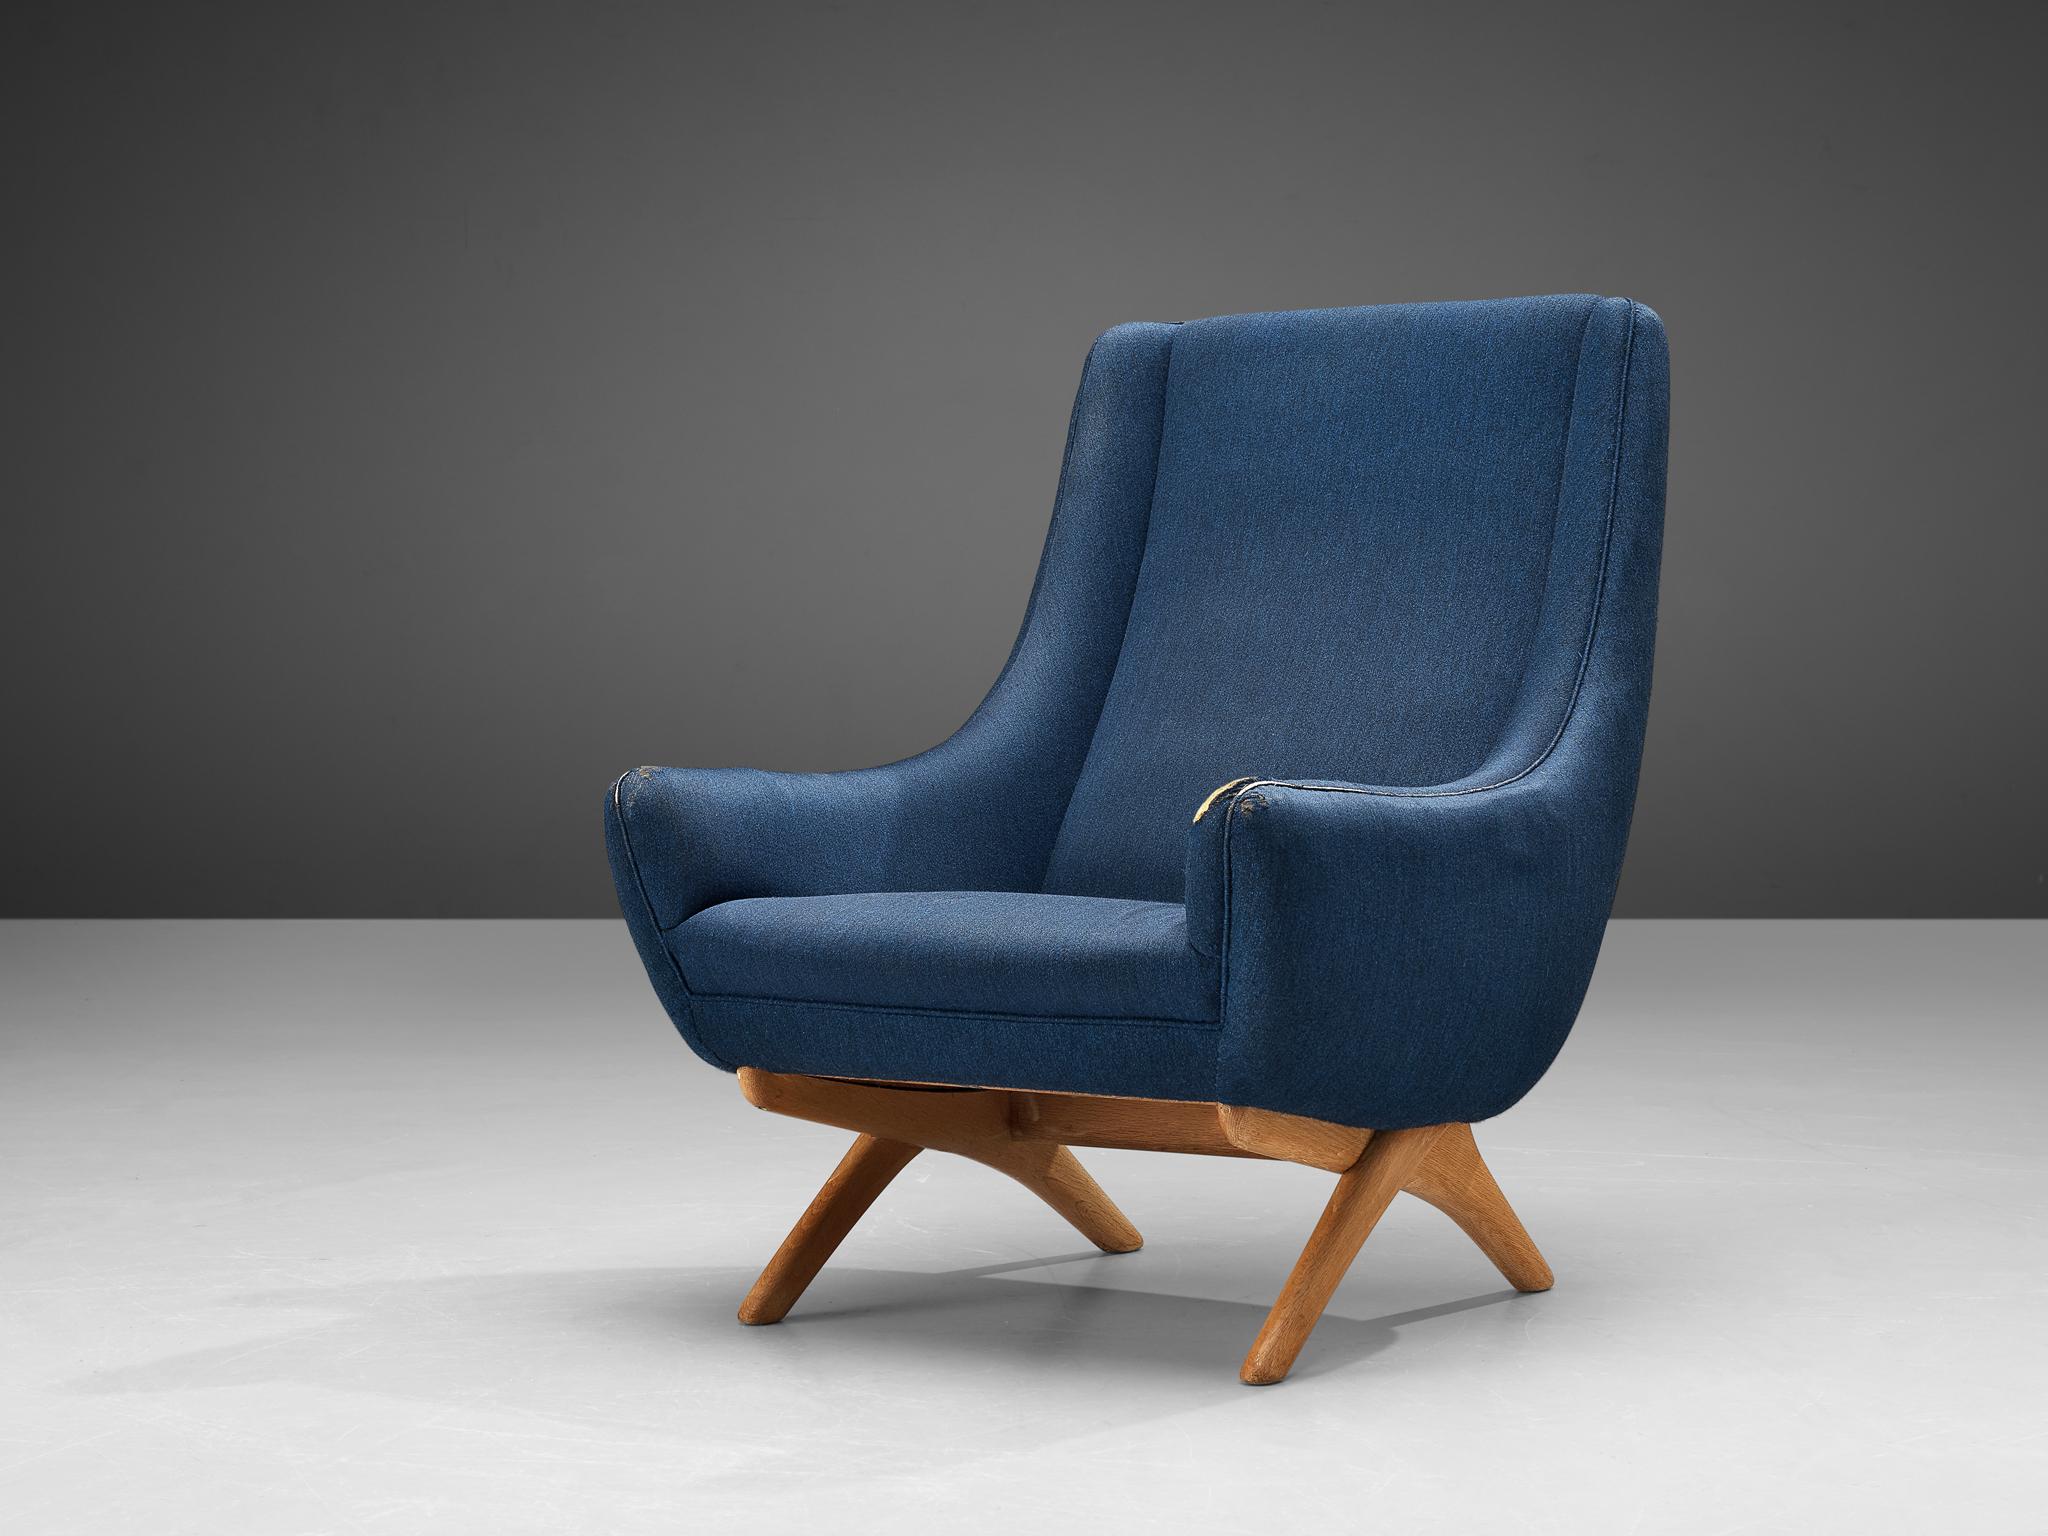 Illum Wikkelsø, armchair, oak, fabric, Denmark, 1950s

This well-designed armchair shows an unusual elegance and great eye for detail, combined with outstanding craftsmanship, which is characteristic for the work of Illum Wikkelsø. The organically